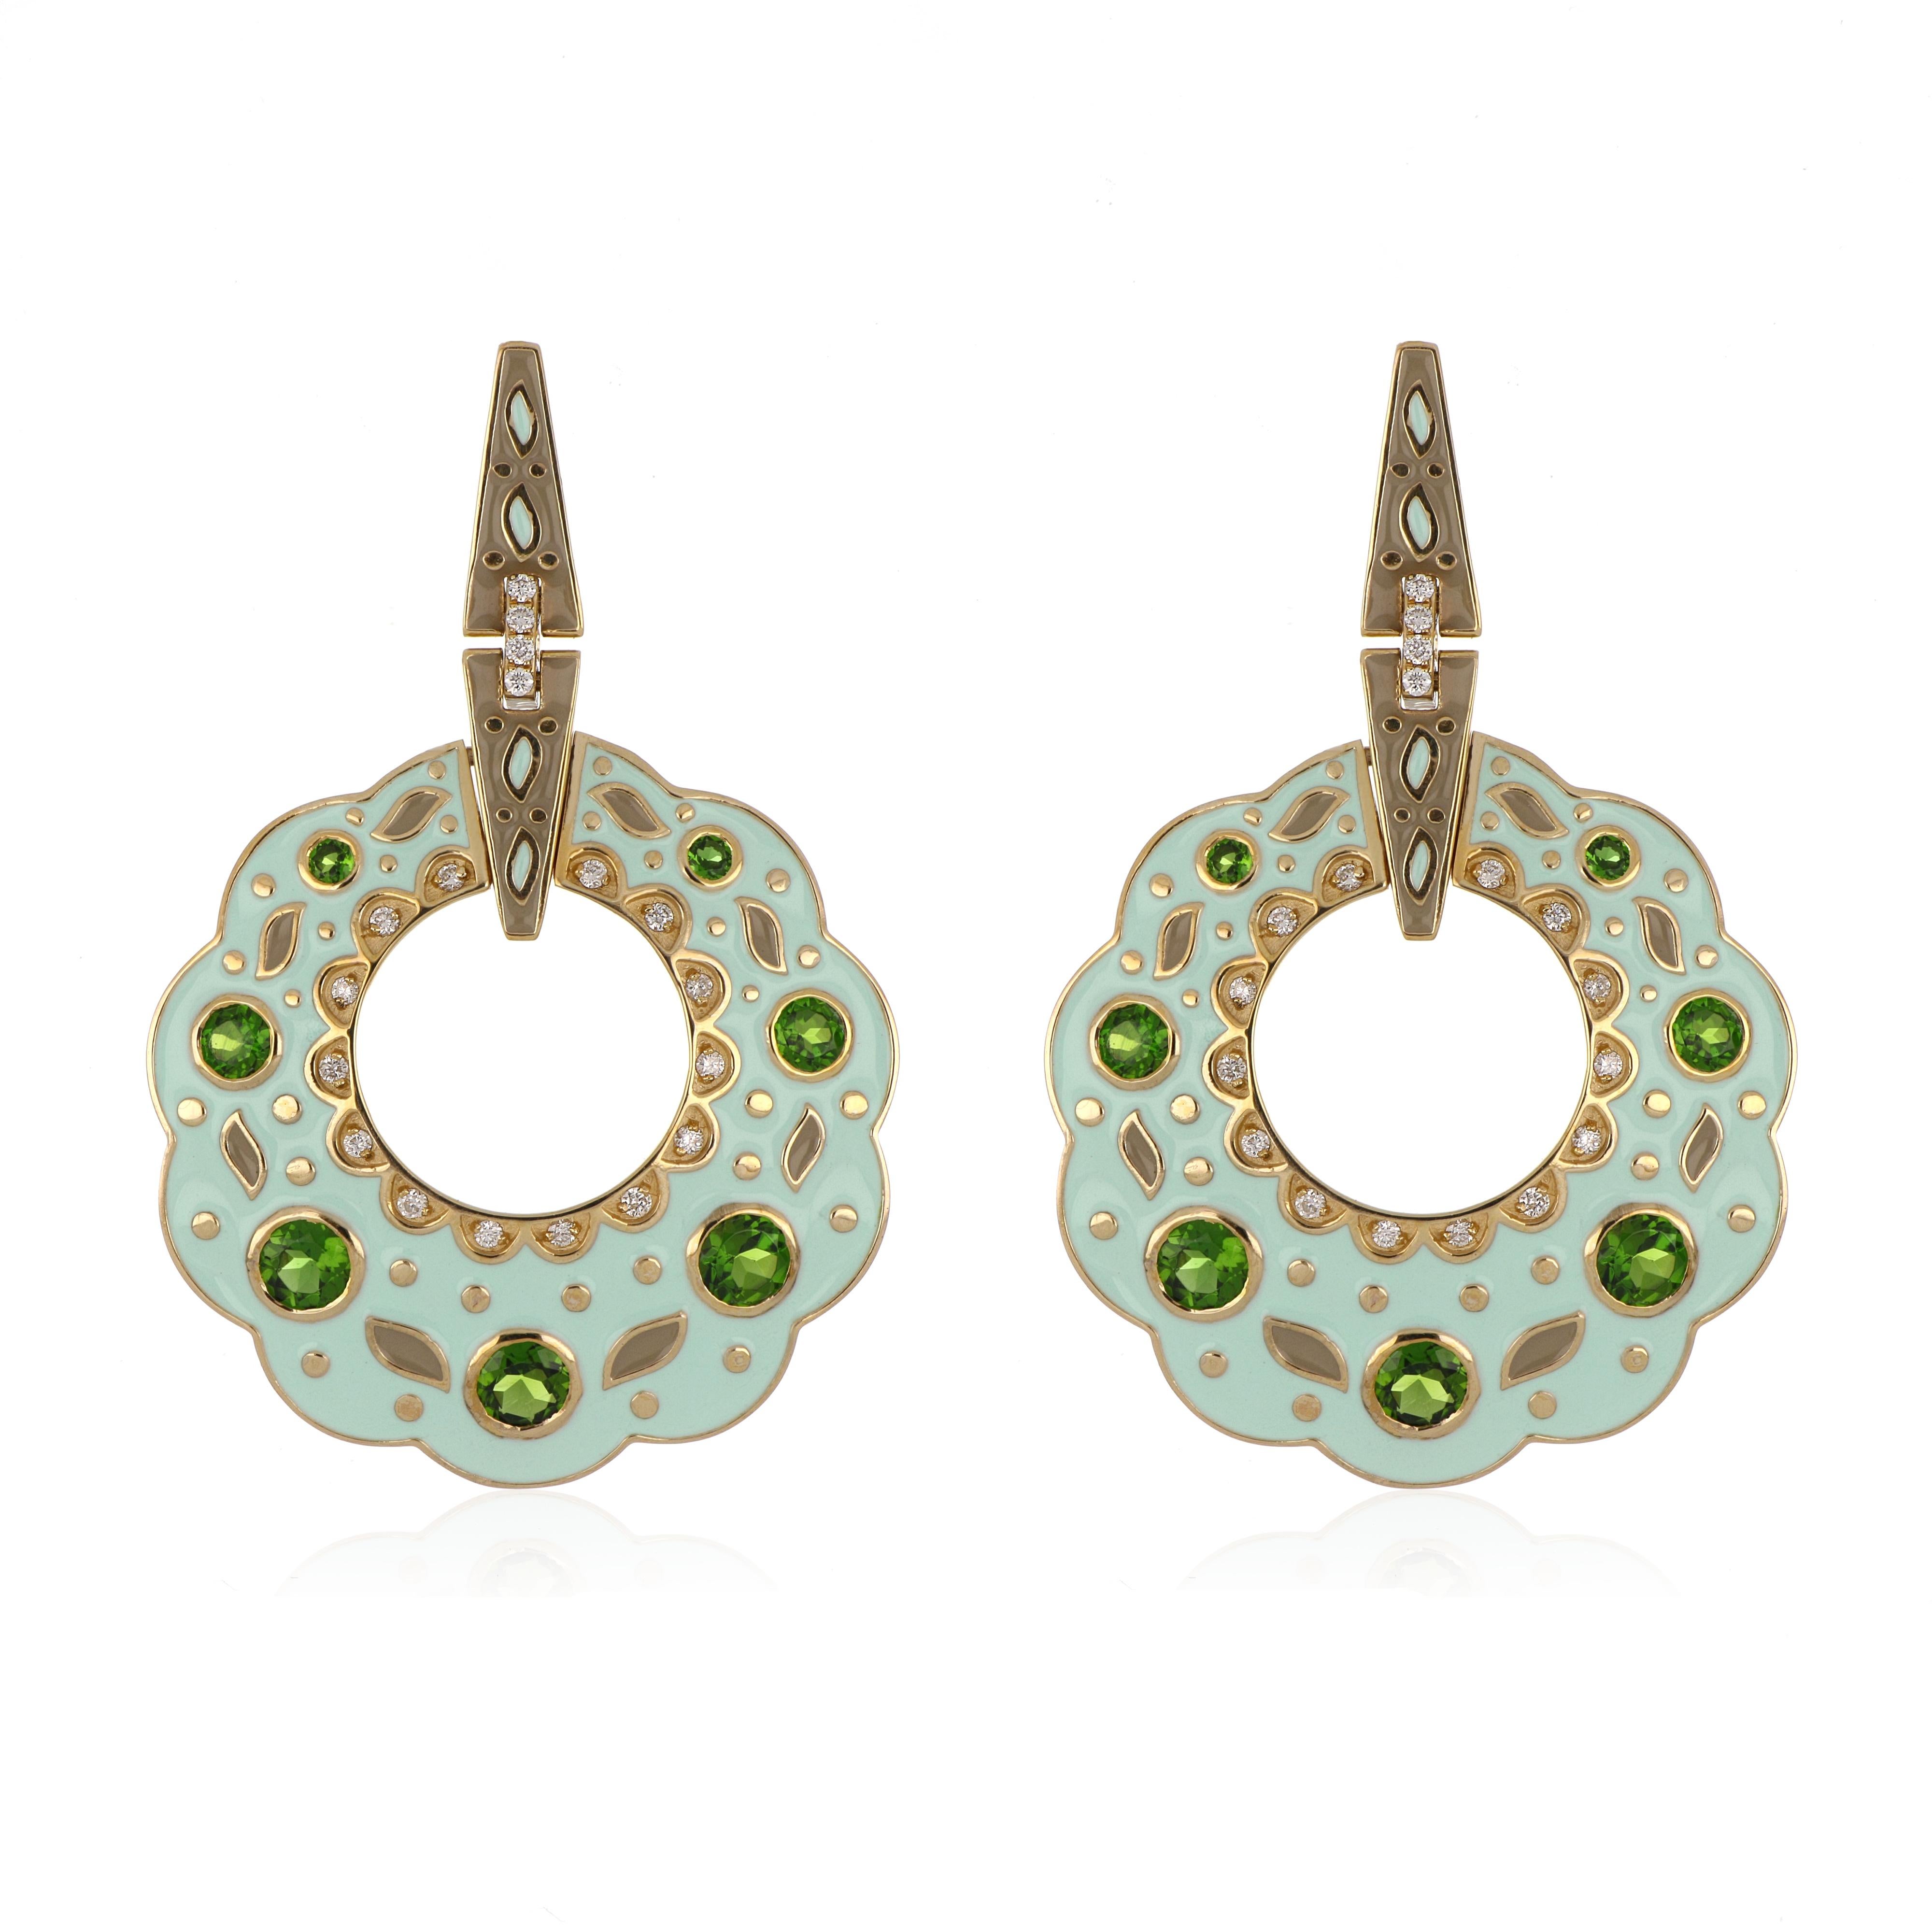 Elegant and exquisite Multi Color Enamel Cocktail 14 K Earring, set with Bezel Set Round cut Chrome Diopside 2.29 Cts. (total) accented with 0.23 Cts. (Total) Brilliant Cut Diamonds. Beautifully hand crafted in 14K Yellow Gold

Stone Size:
Chrome